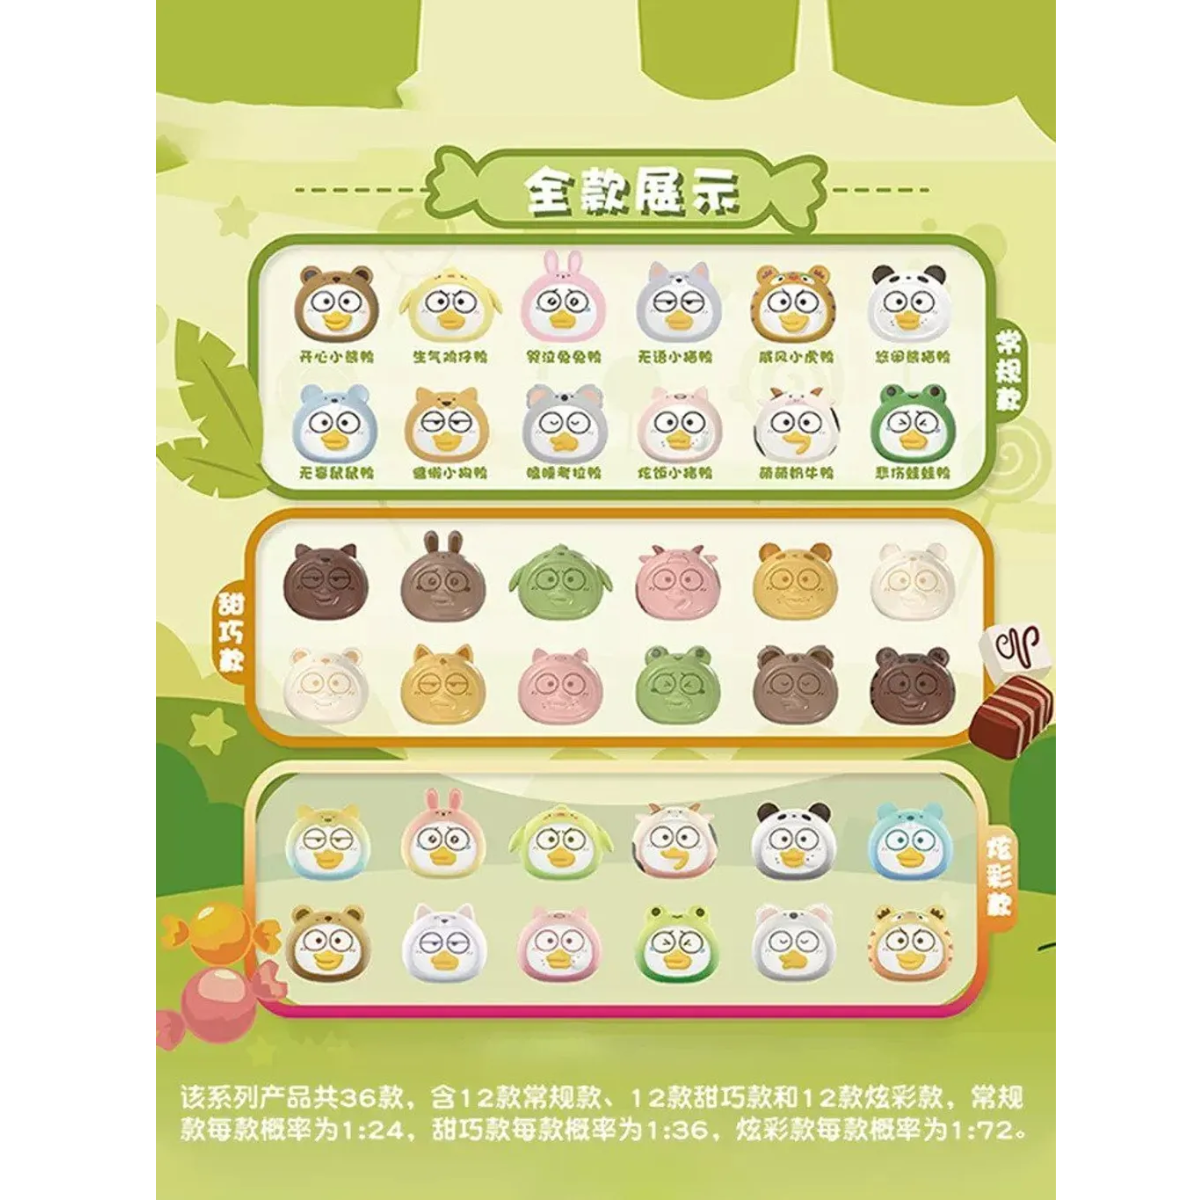 Duckyo Friends Animal Candy Series-Single Pack (6pcs)-Wandianwuxian-Ace Cards & Collectibles